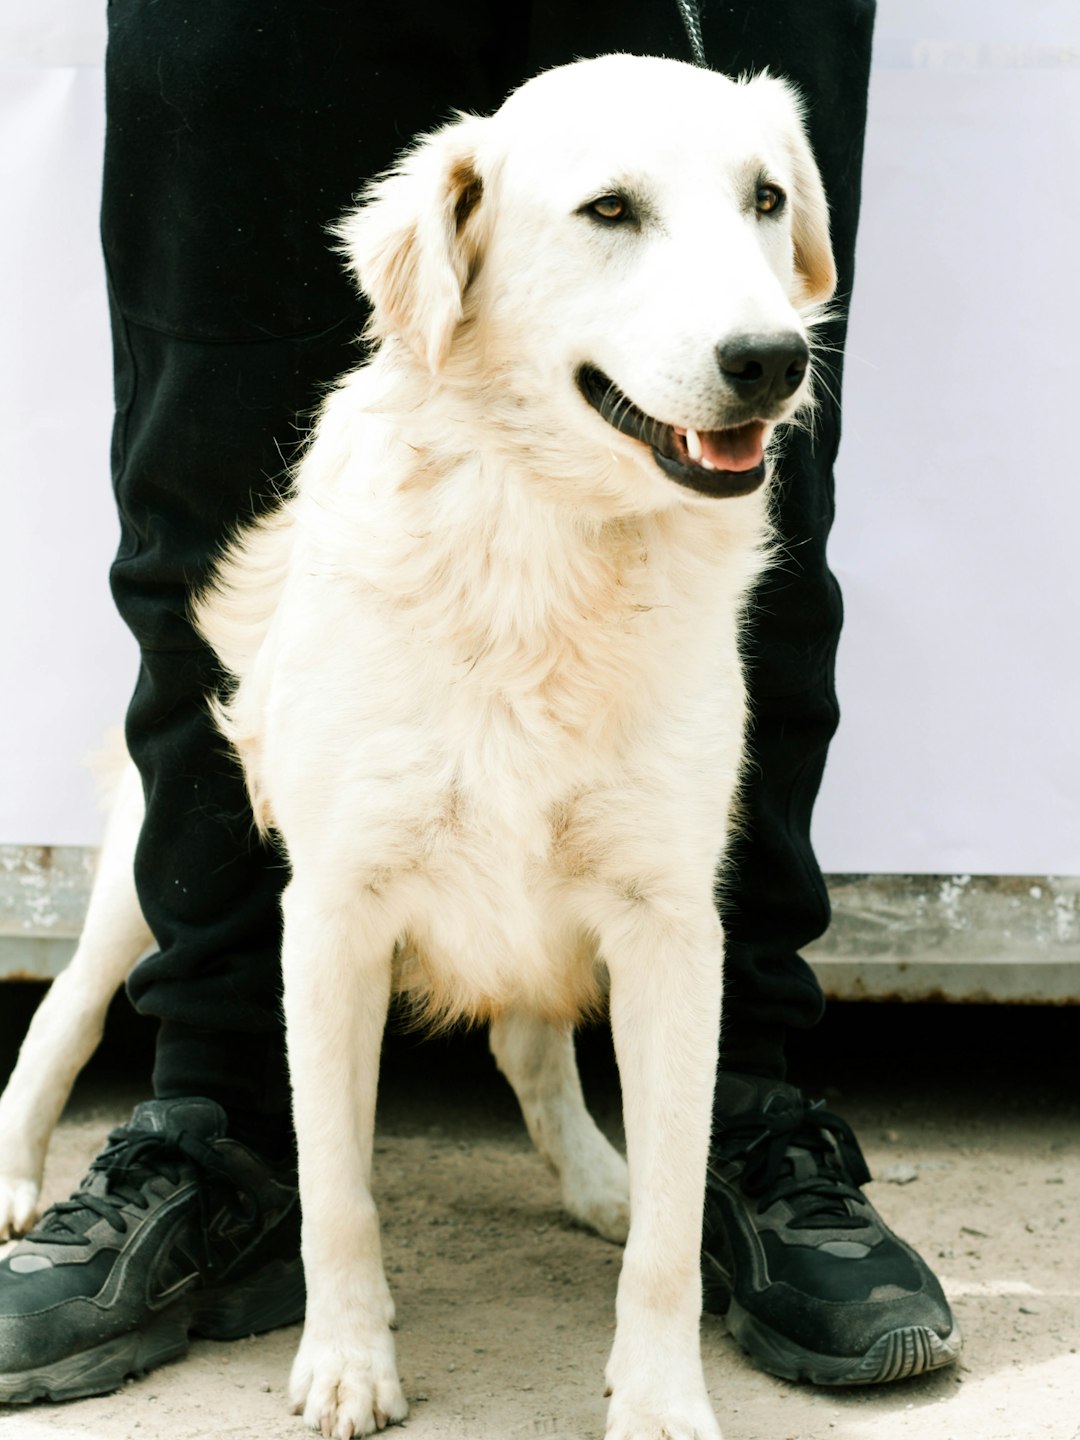 person in black pants and black boots standing beside white short coated dog